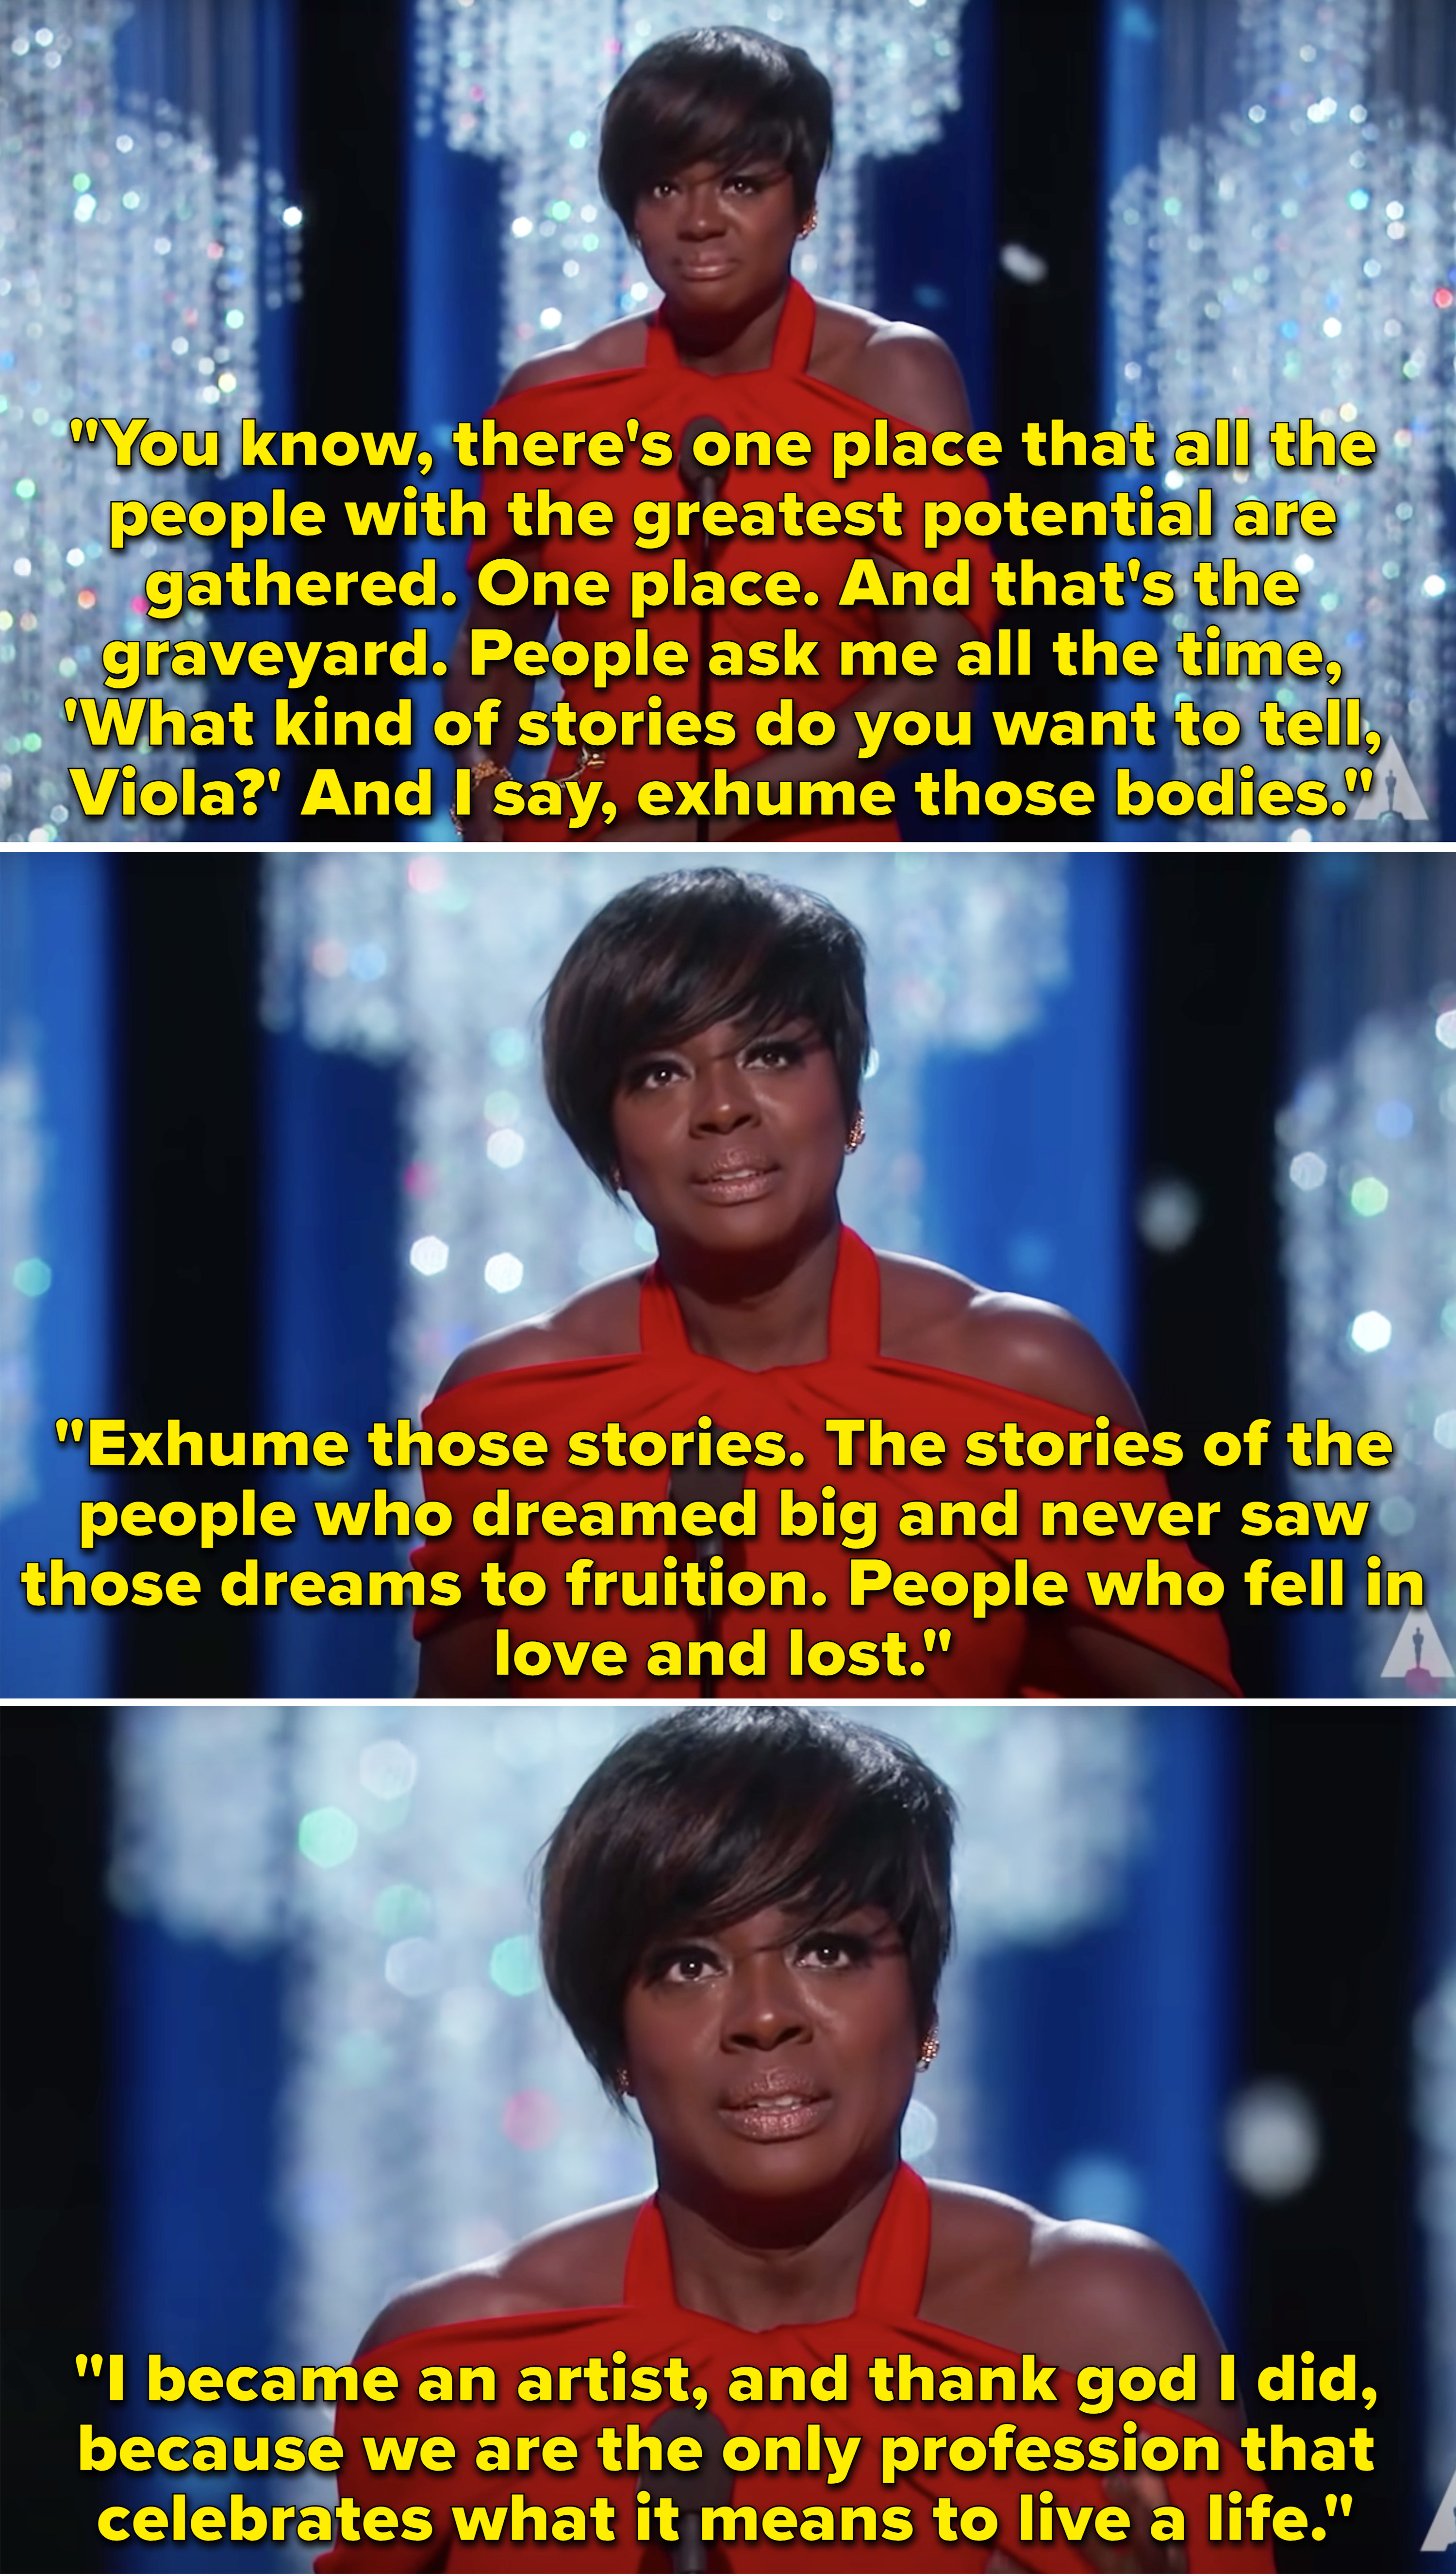 Viola accepting her award and saying a graveyard is where all of the great people are buried and those people have the stories that are worth telling